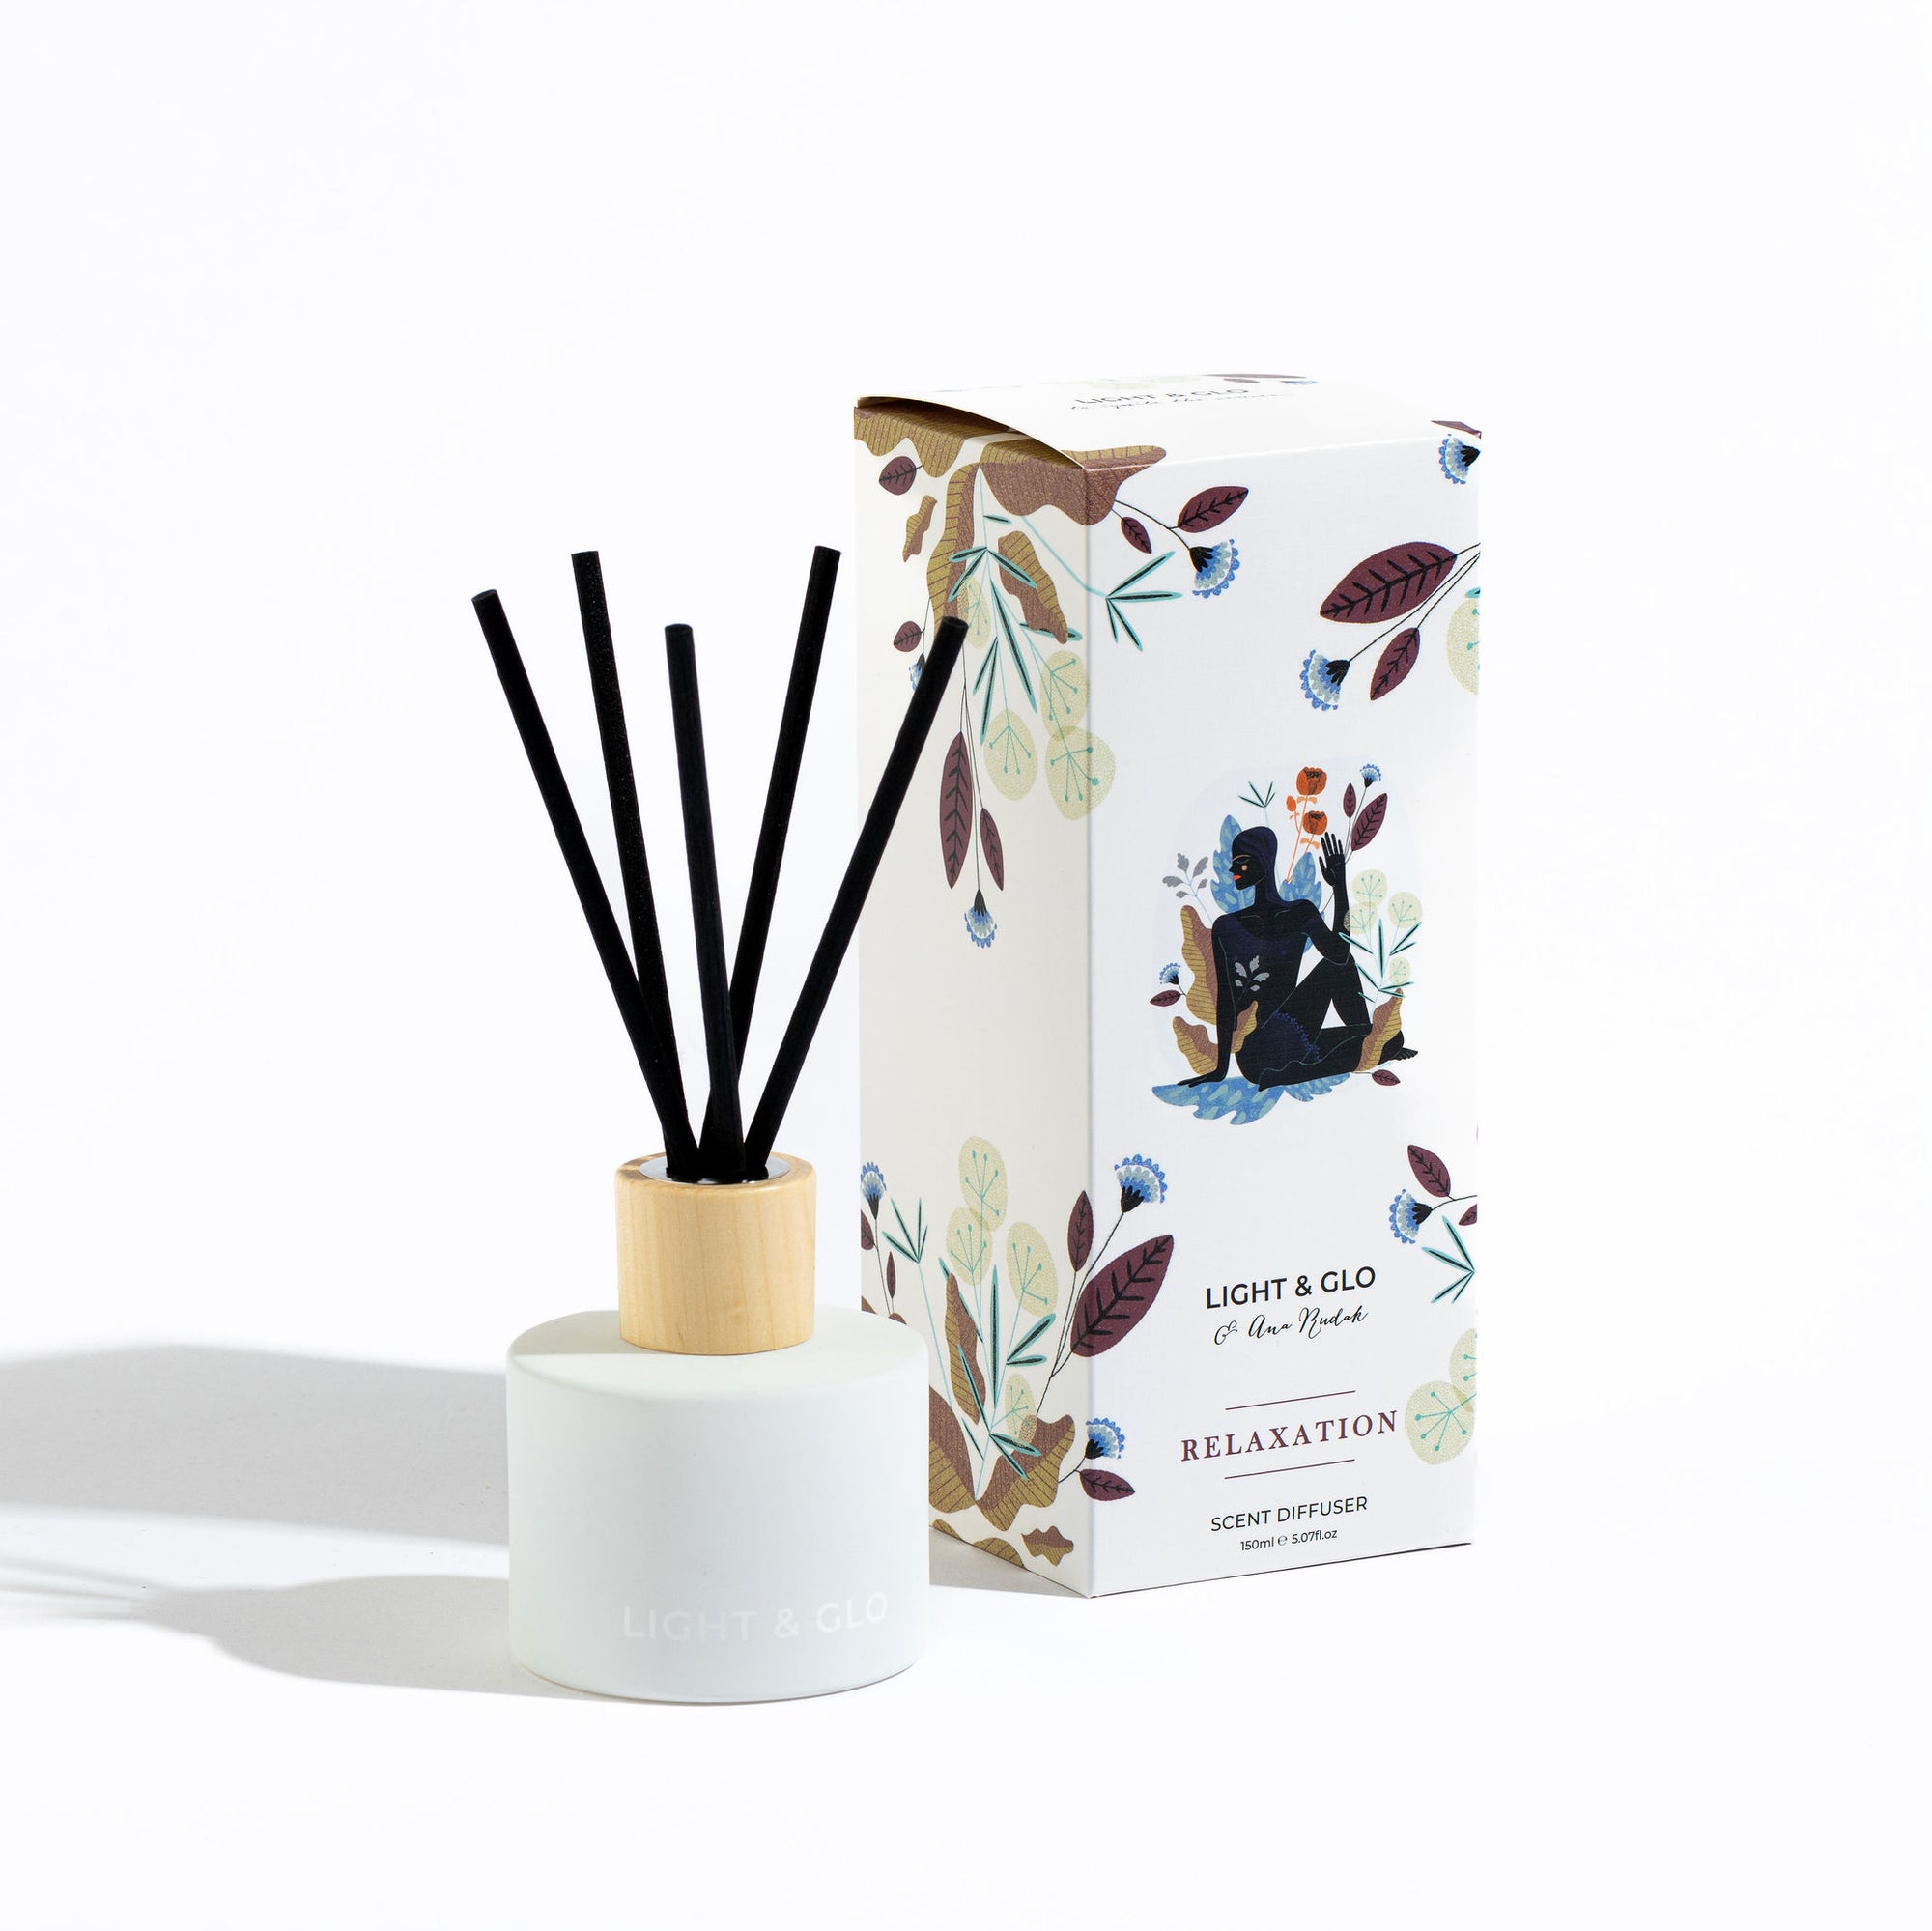 Relaxation - Asana Scent Diffuser | Luxury Candles & Home Fragrances by Light + Glo